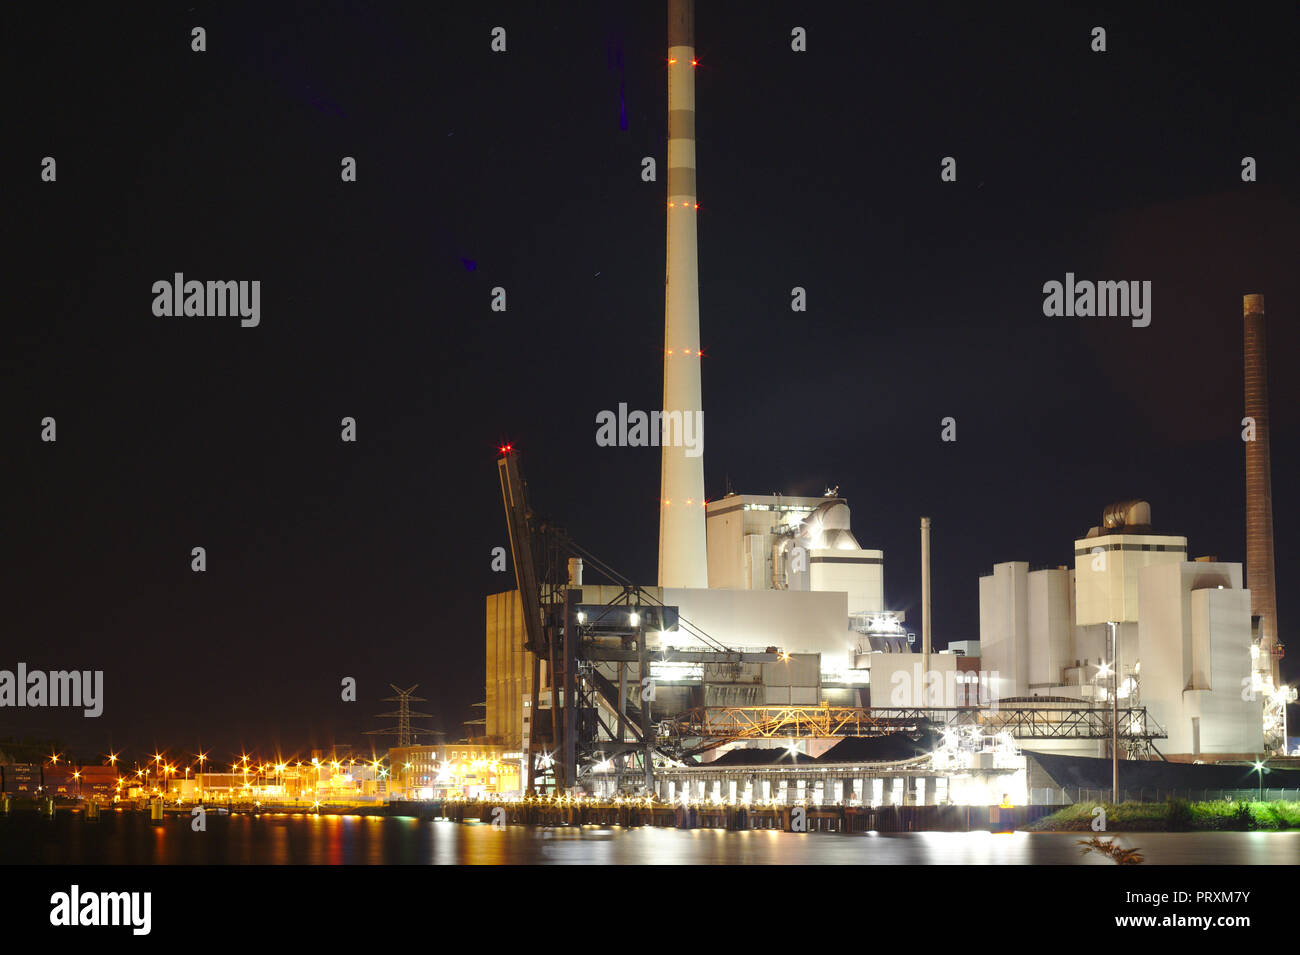 Bremen ports night Stadtwerke with lights energy for the city coal power plants Stock Photo